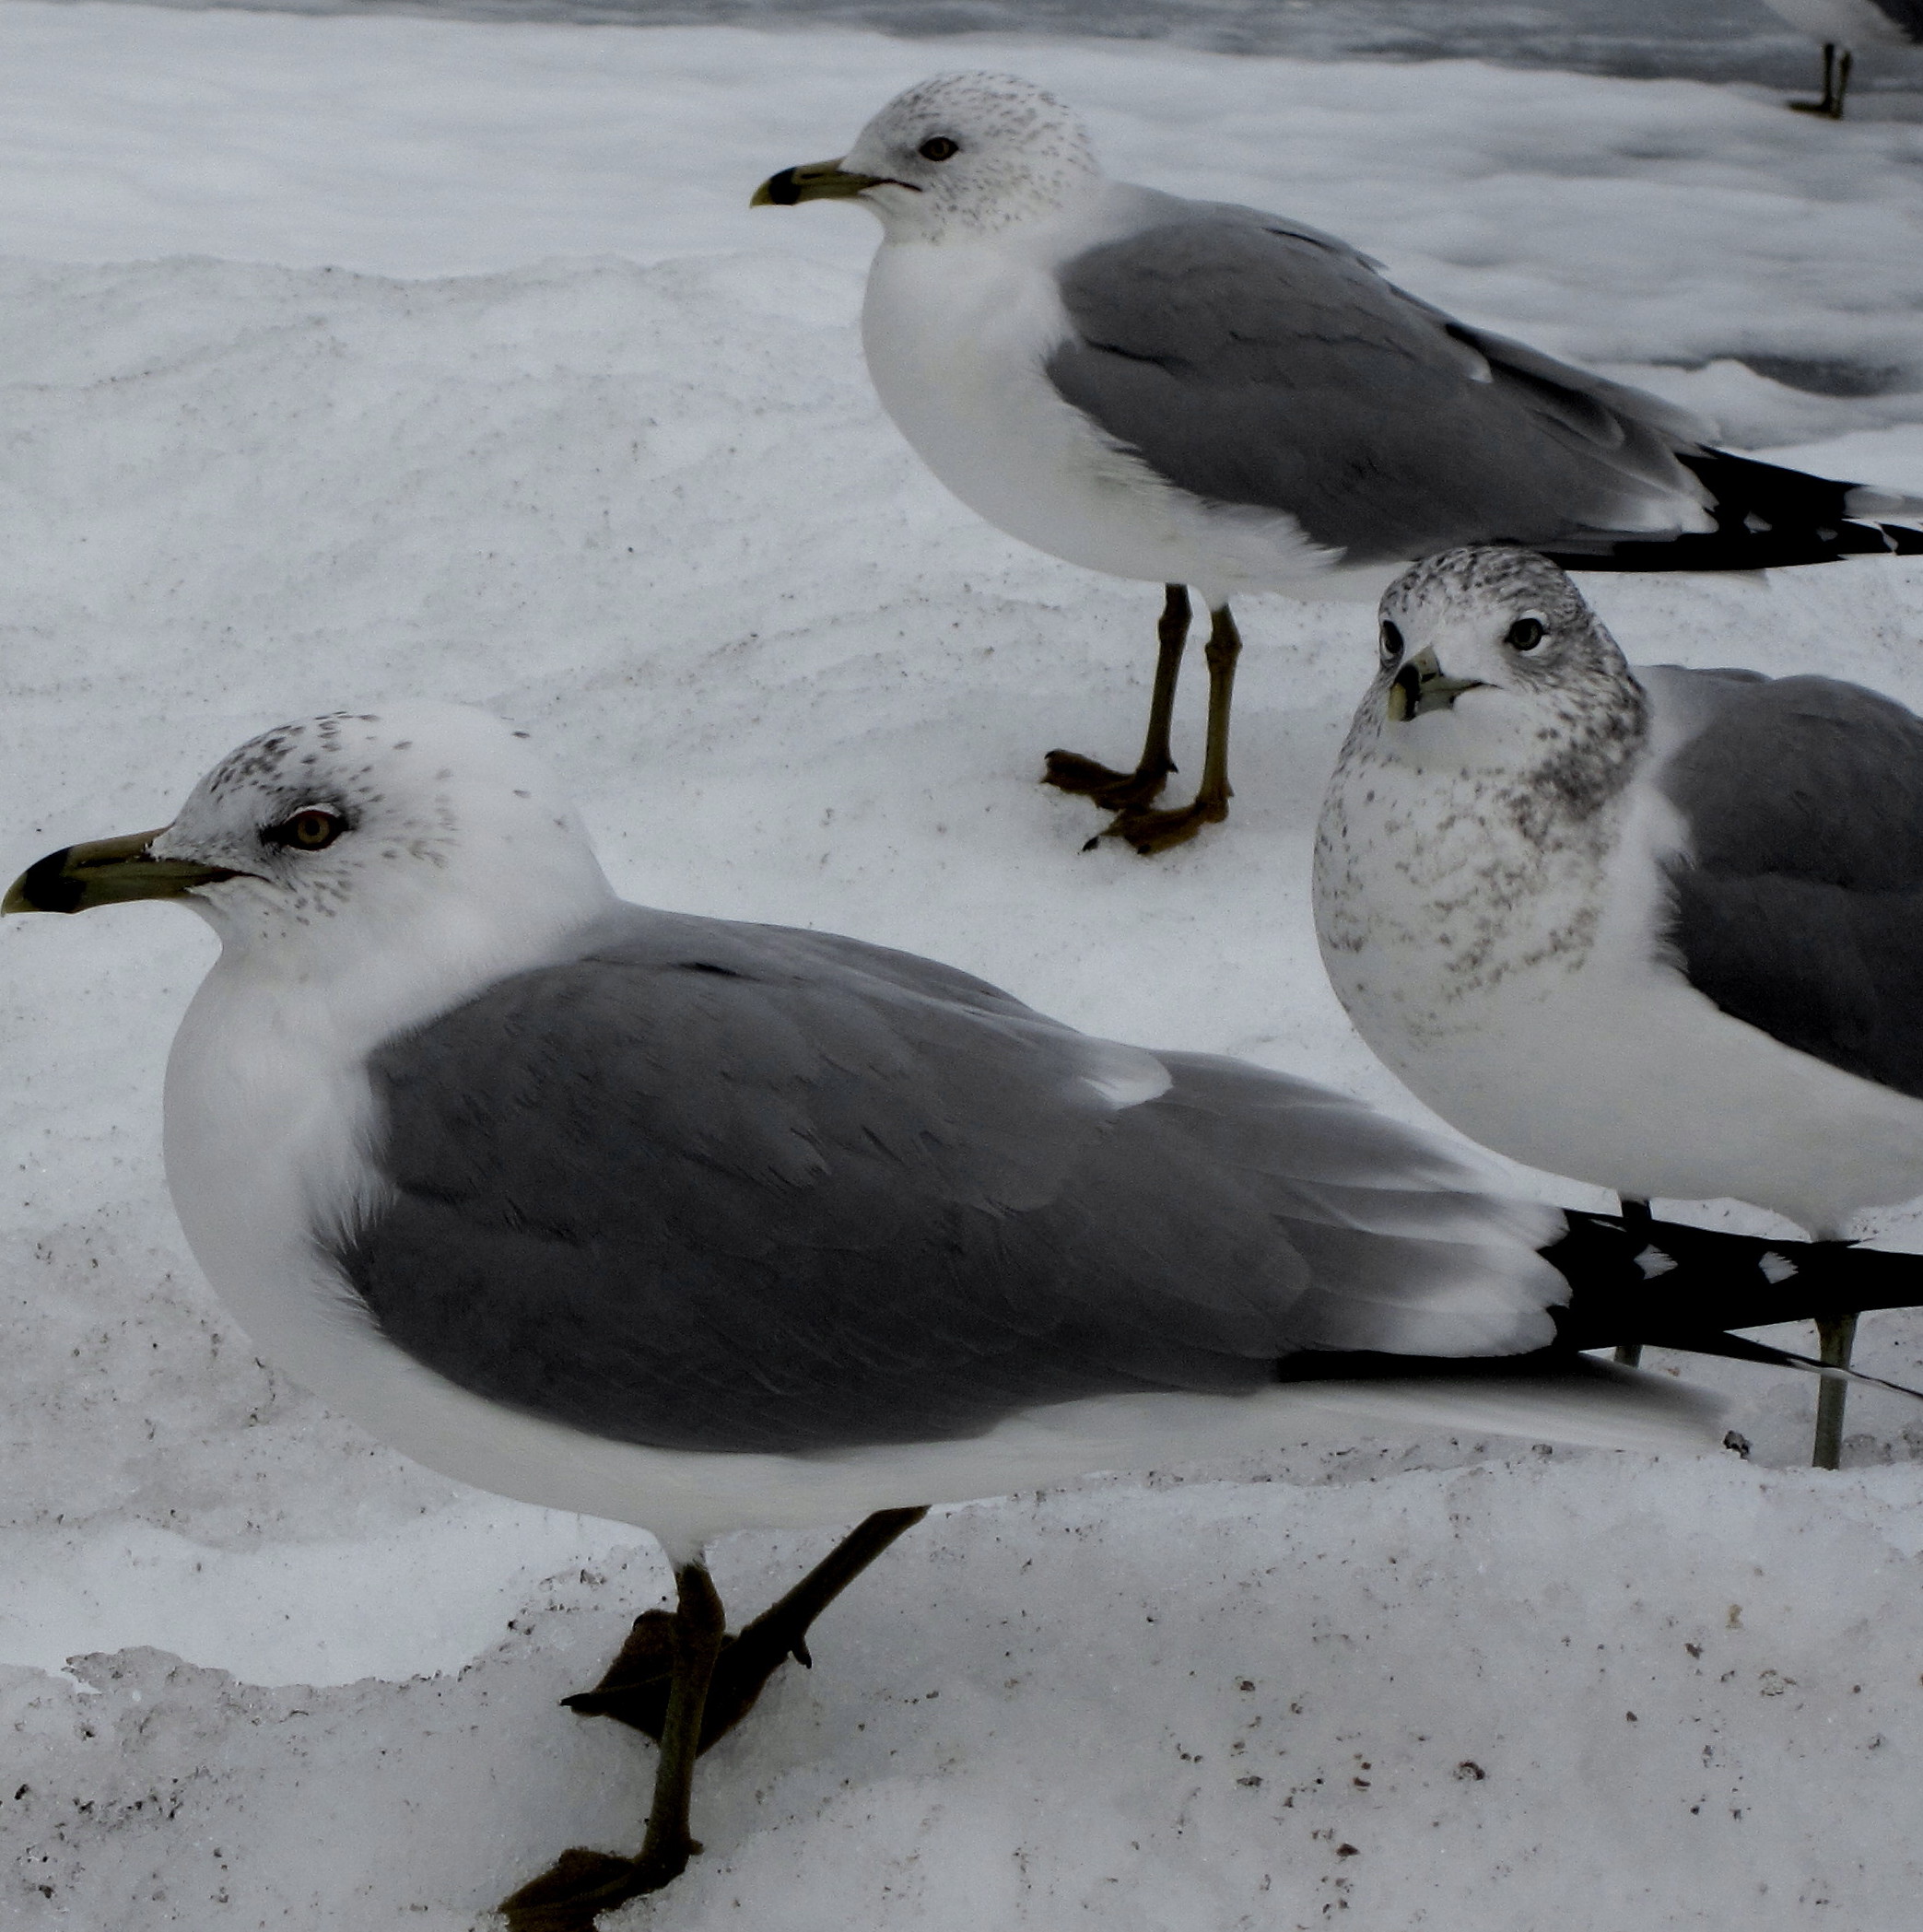 Seagulls (user submitted)